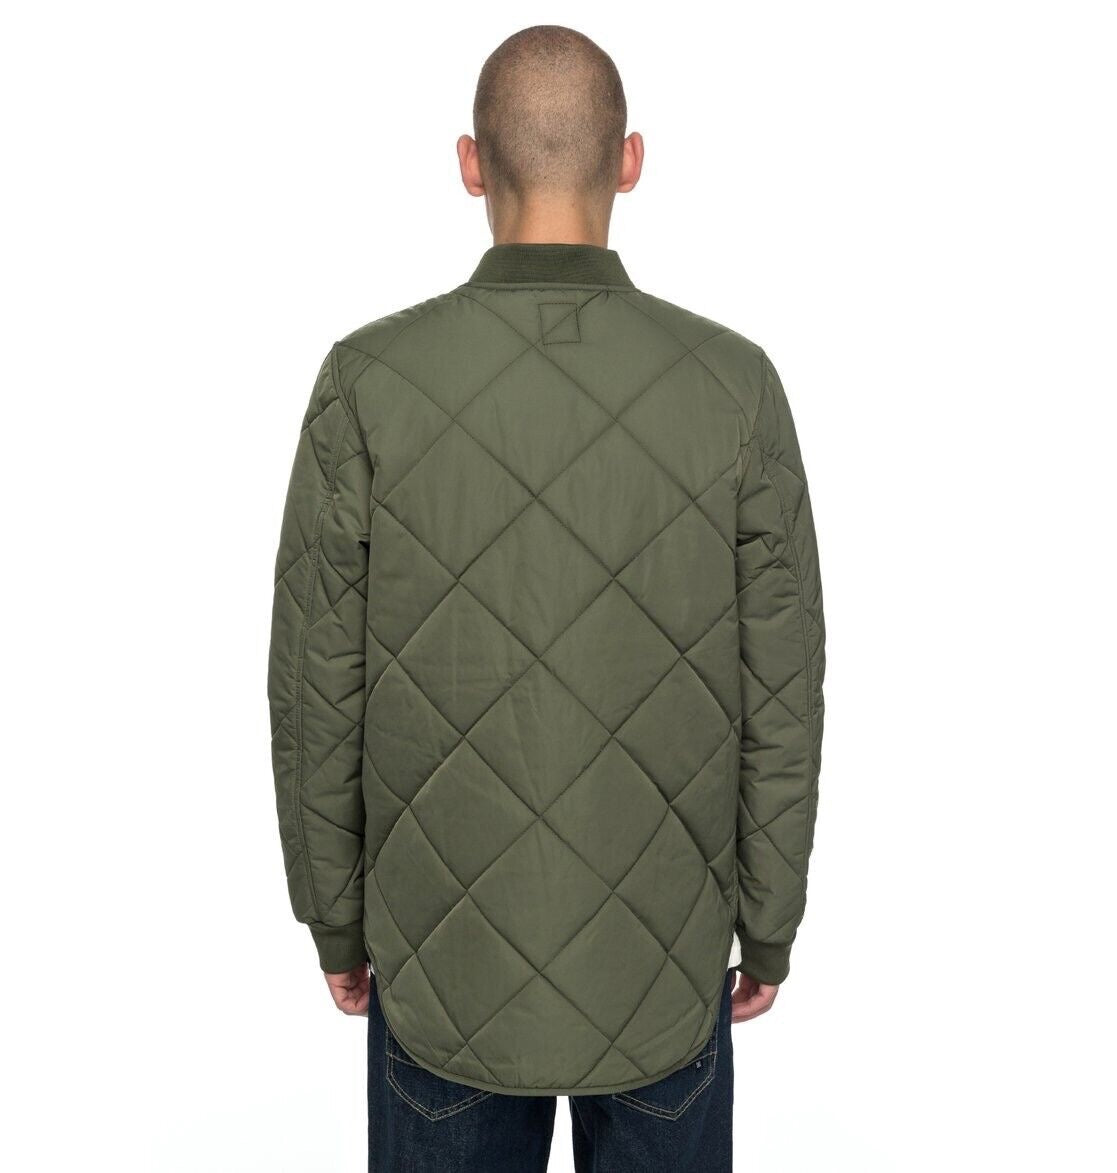 DC SHOES HEDGEHOP GREEN QUILTED BOMBER JACKET (XL)